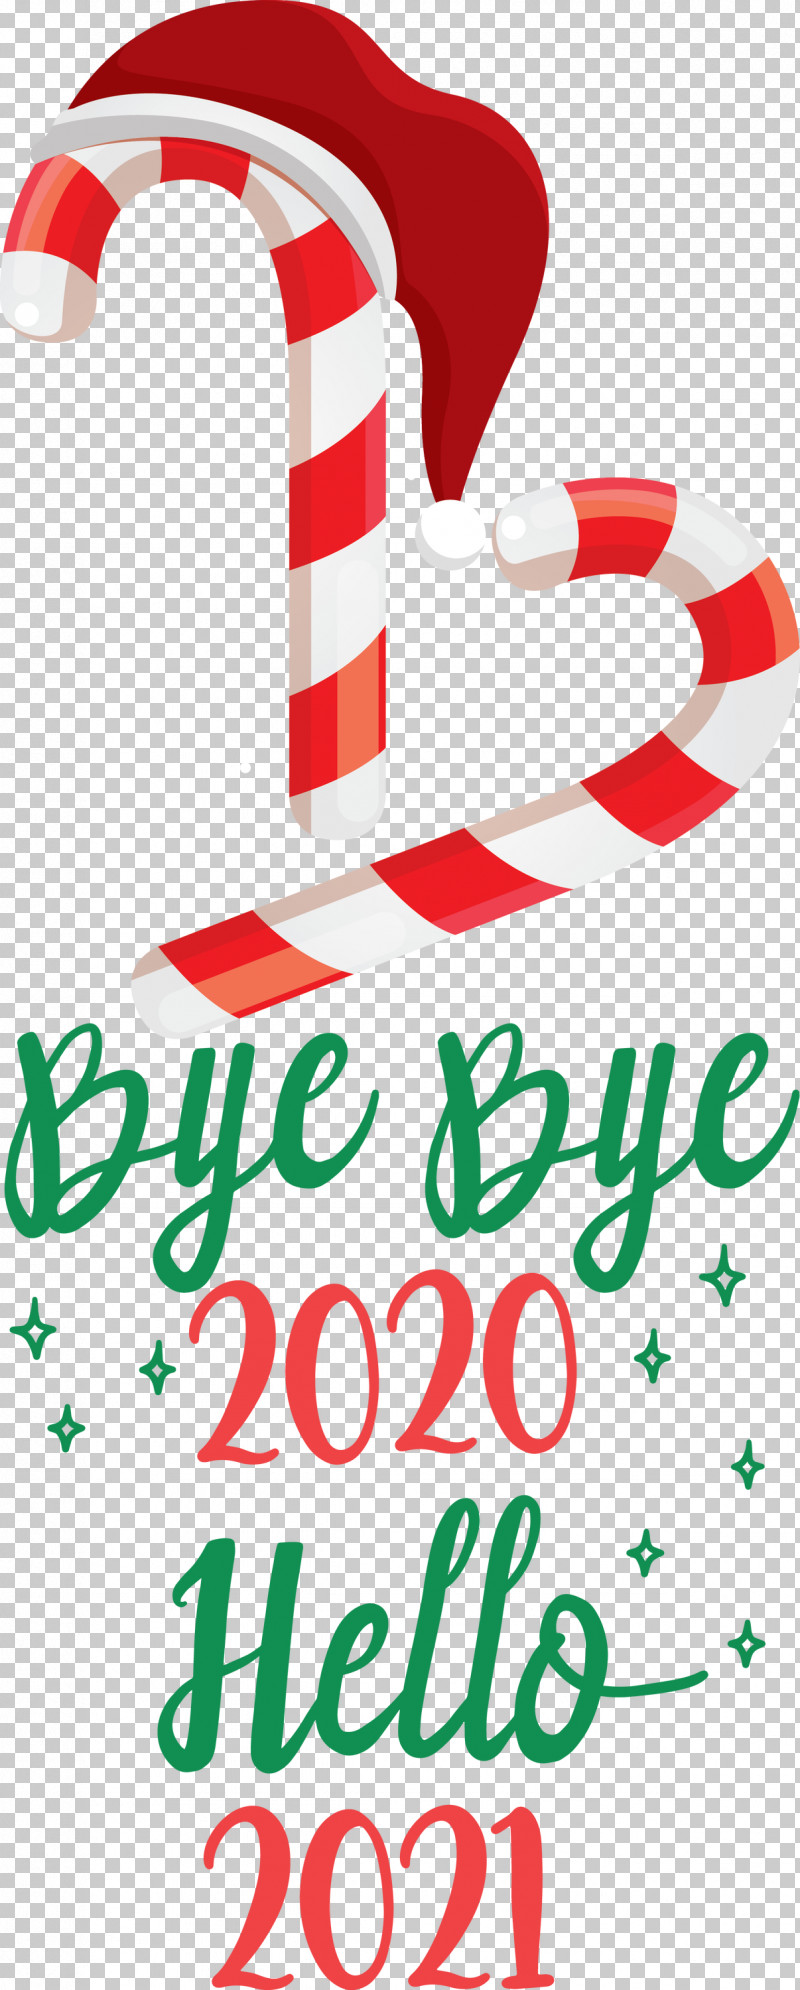 Hello 2021 Year Bye Bye 2020 Year PNG, Clipart, Bye Bye 2020 Year, Christmas Day, Christmas Decoration, Christmas Gift, Christmas Ornament Free PNG Download